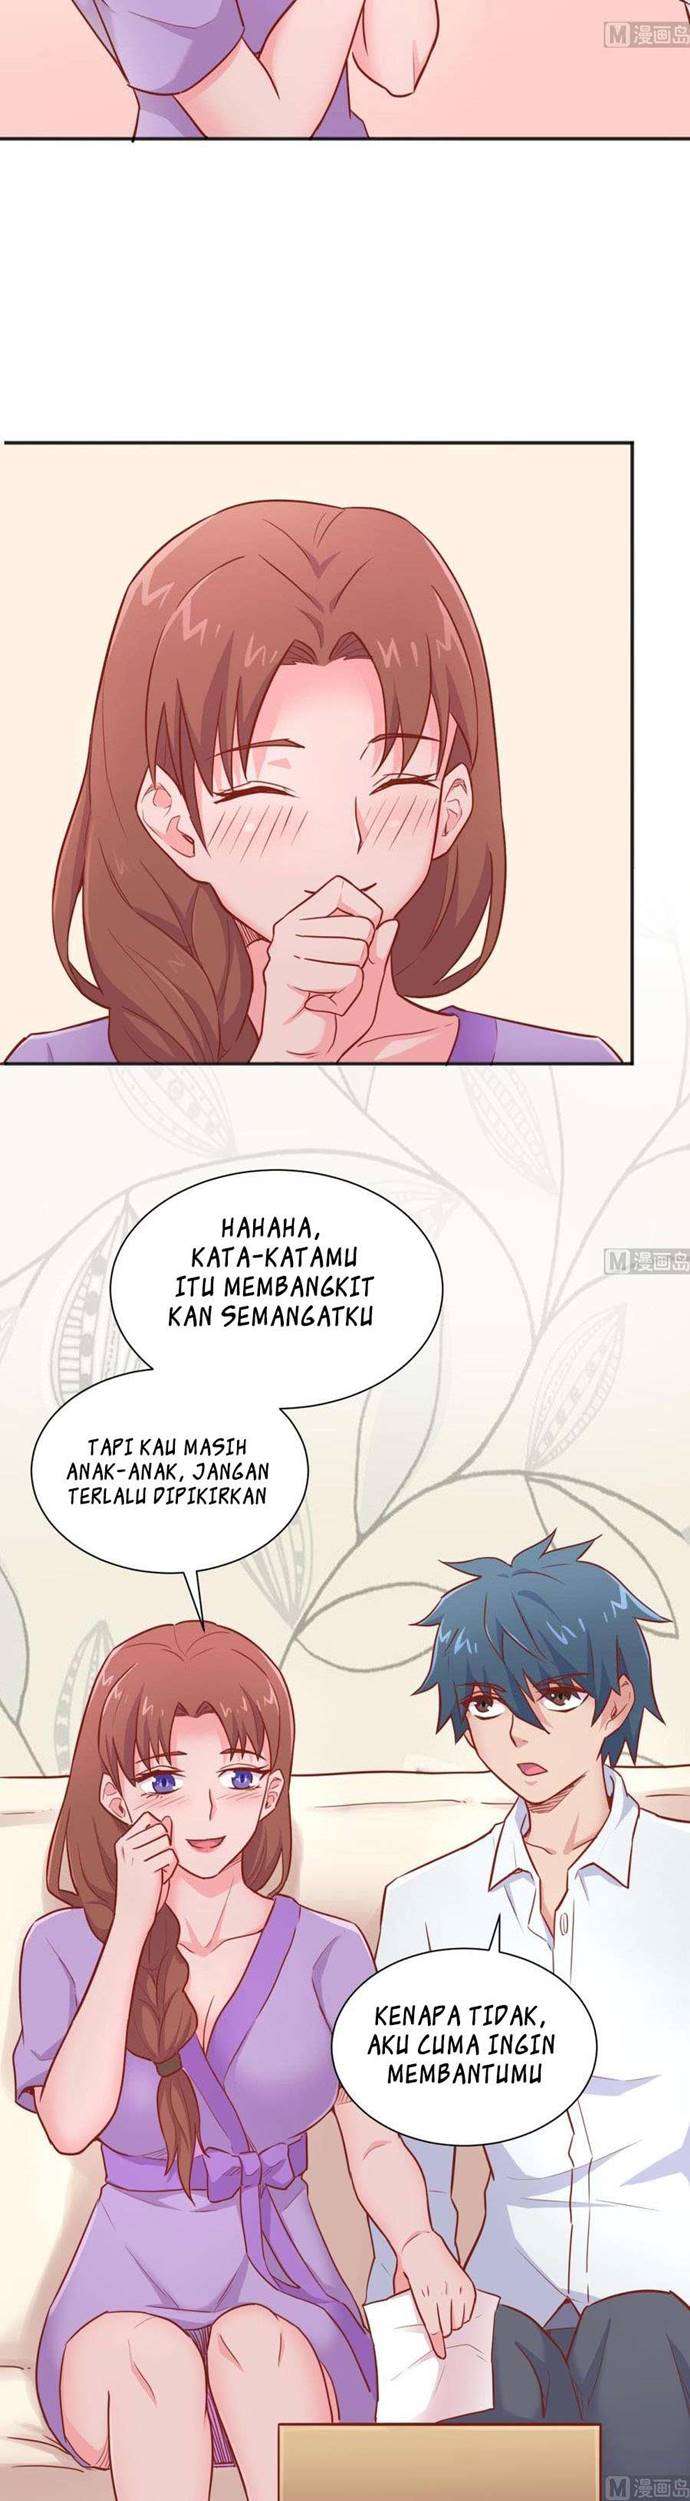 Goddess’s Personal Doctor Chapter 25